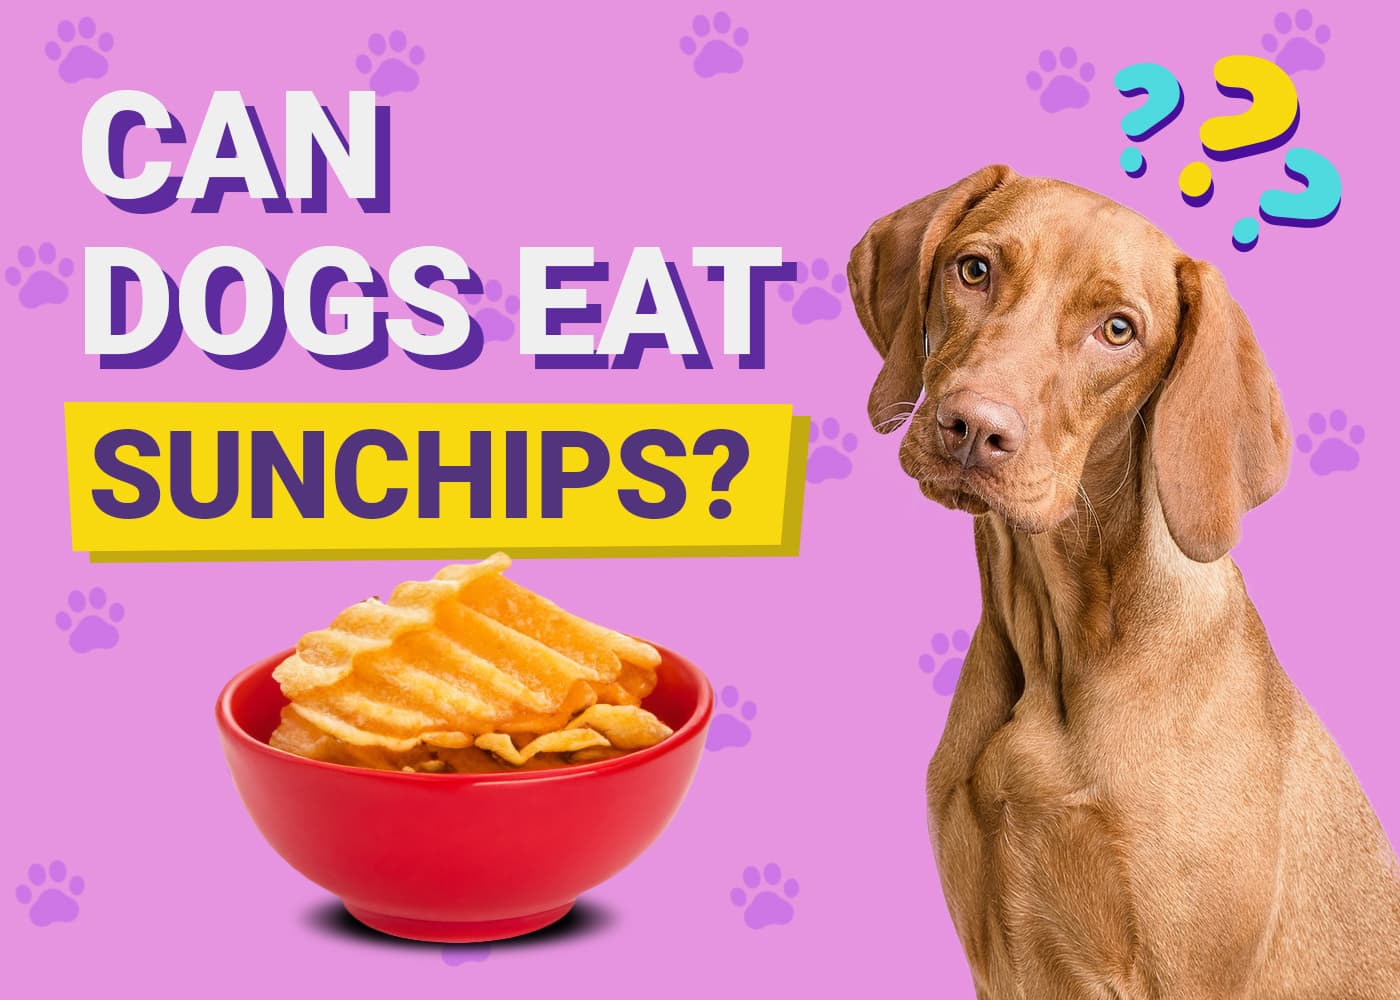 Can Dogs Eat Sunchips